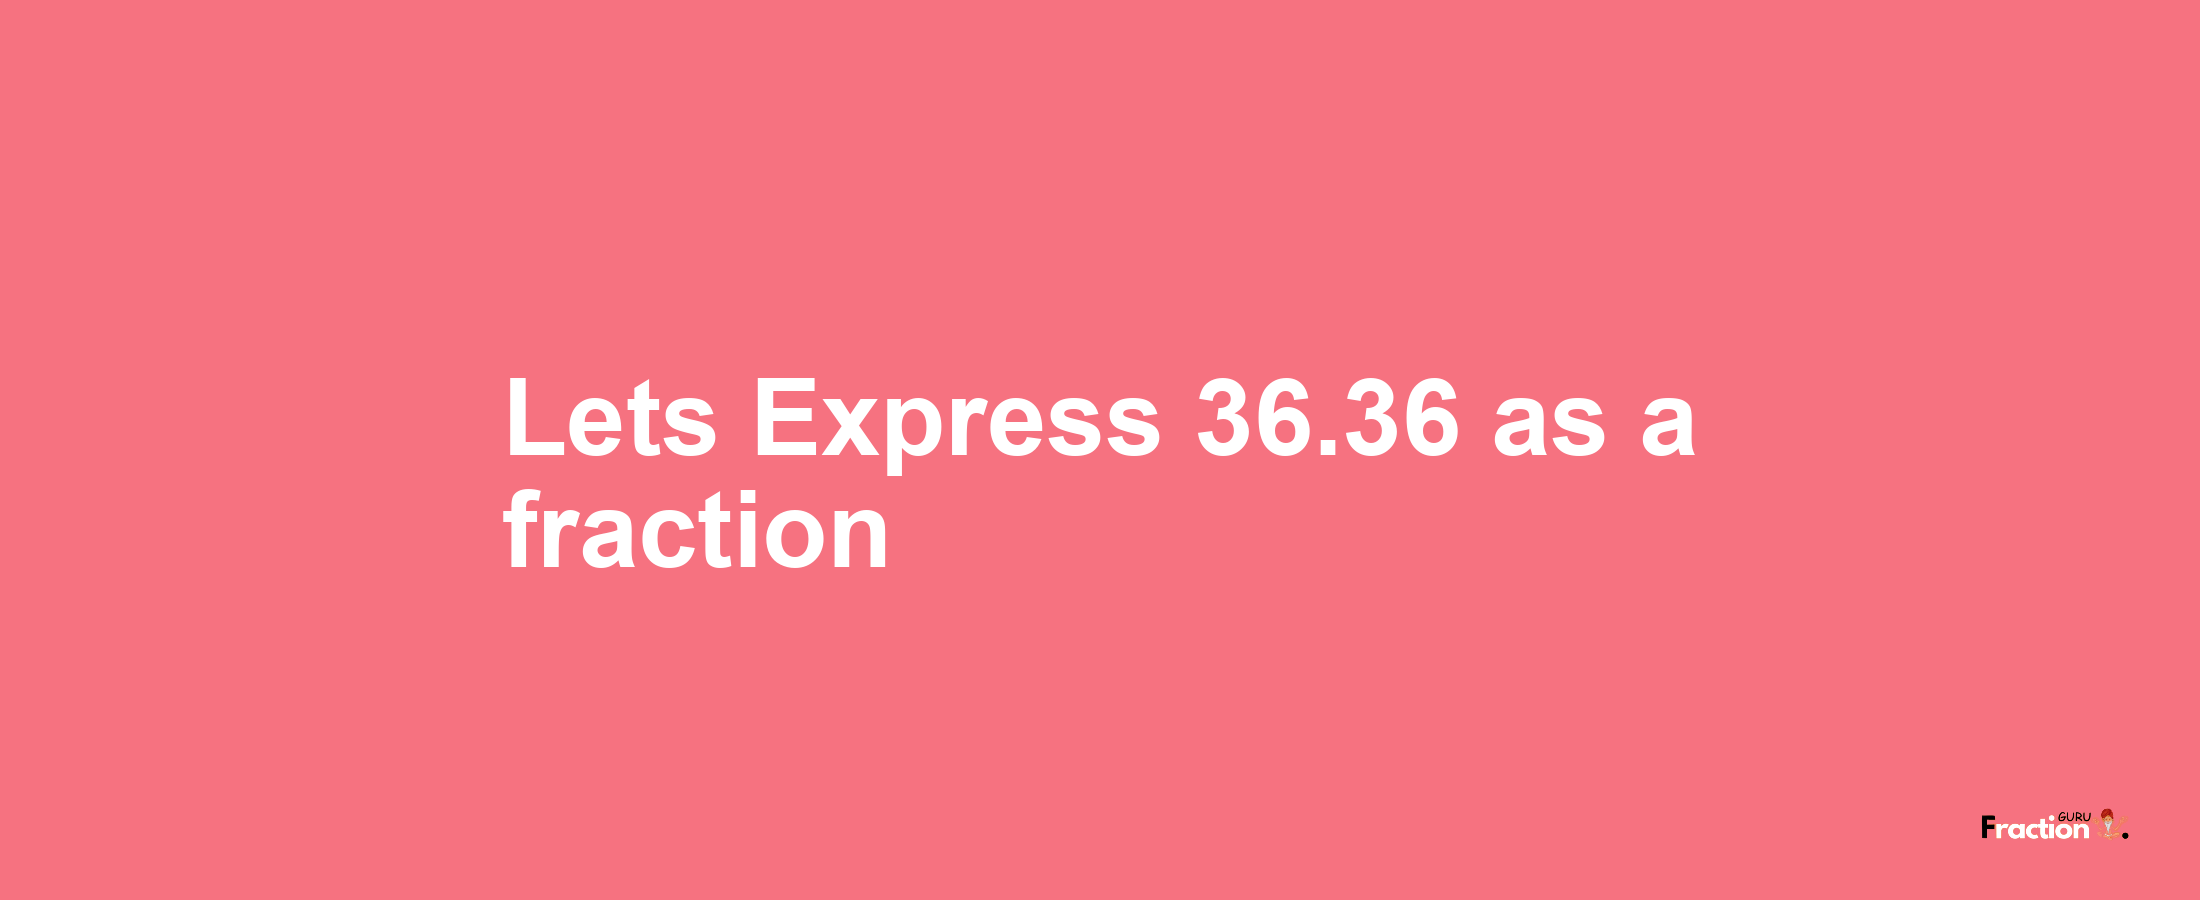 Lets Express 36.36 as afraction